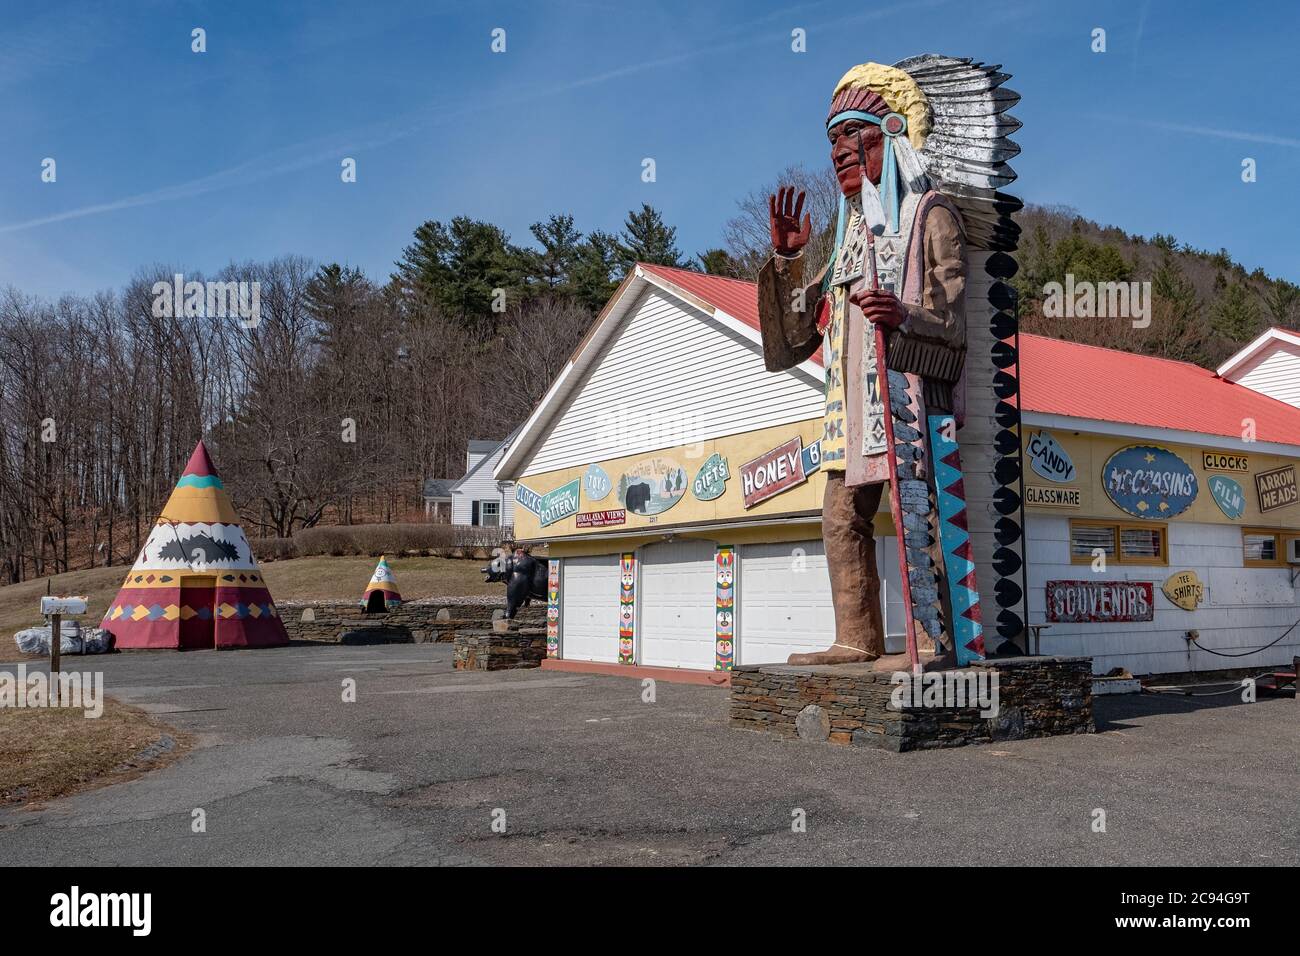 The Big Indian Shop on the Mohawk Trail in Shelburne Falls, Massachusetts Stock Photo